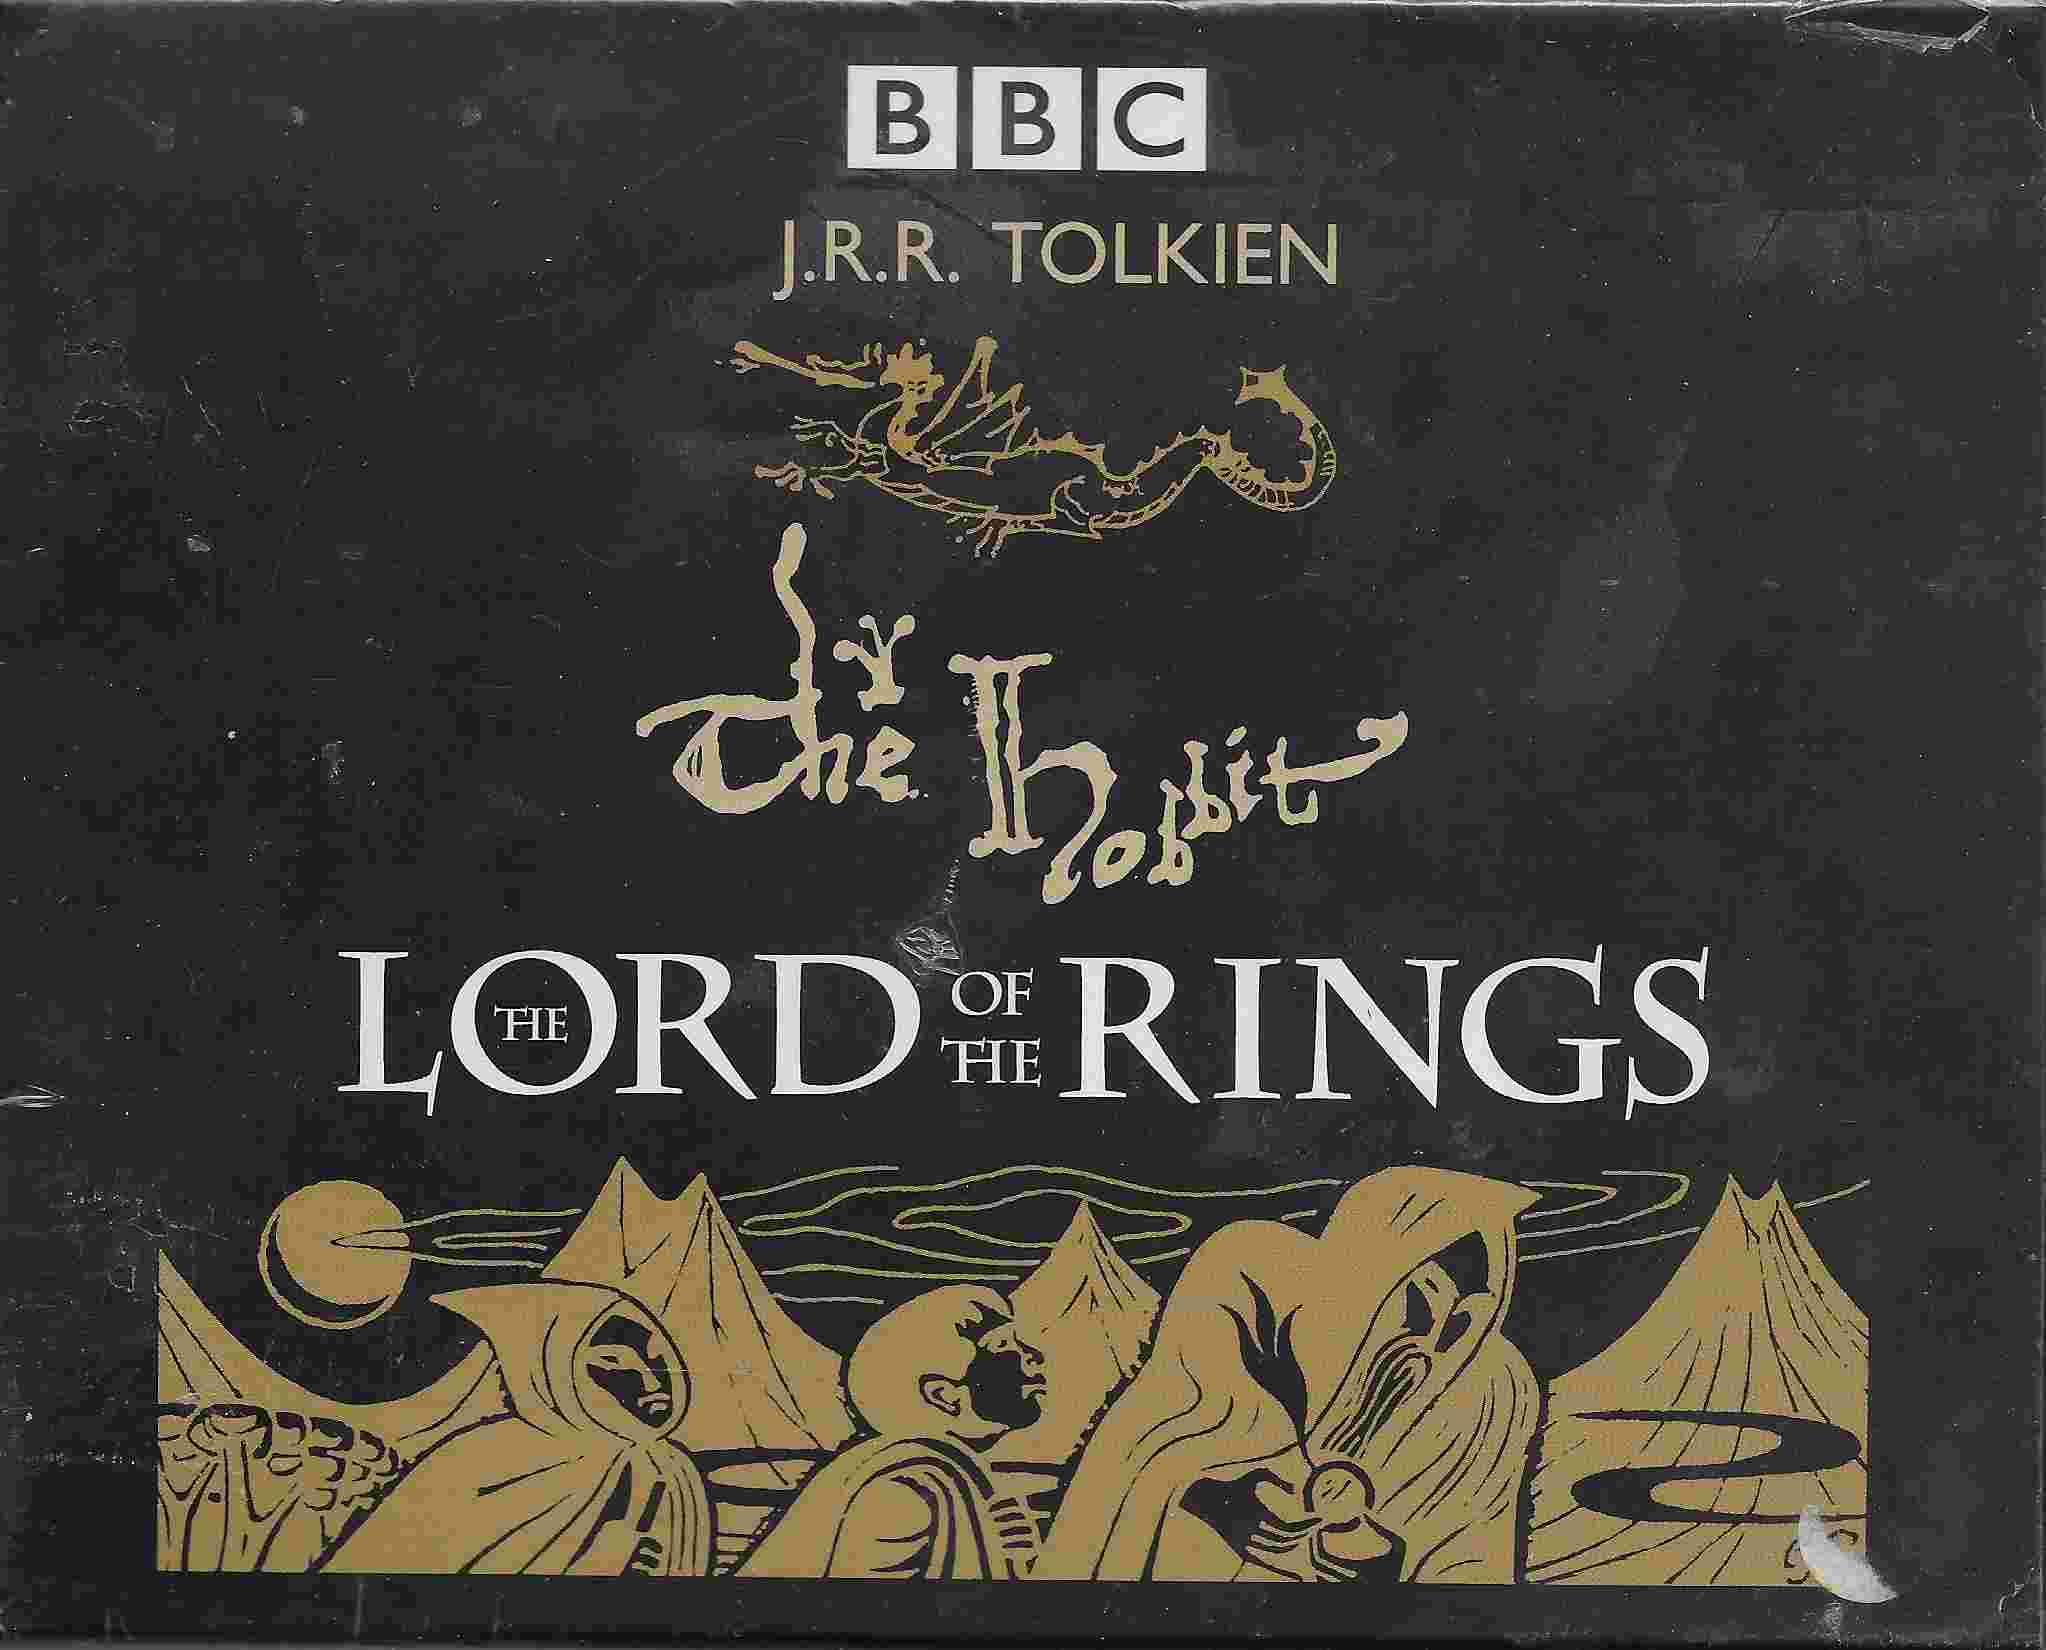 Picture of ISBN 0-563-52844-3 The hobbit / The lord of the rings by artist J. R. R. Tolkien from the BBC cds - Records and Tapes library